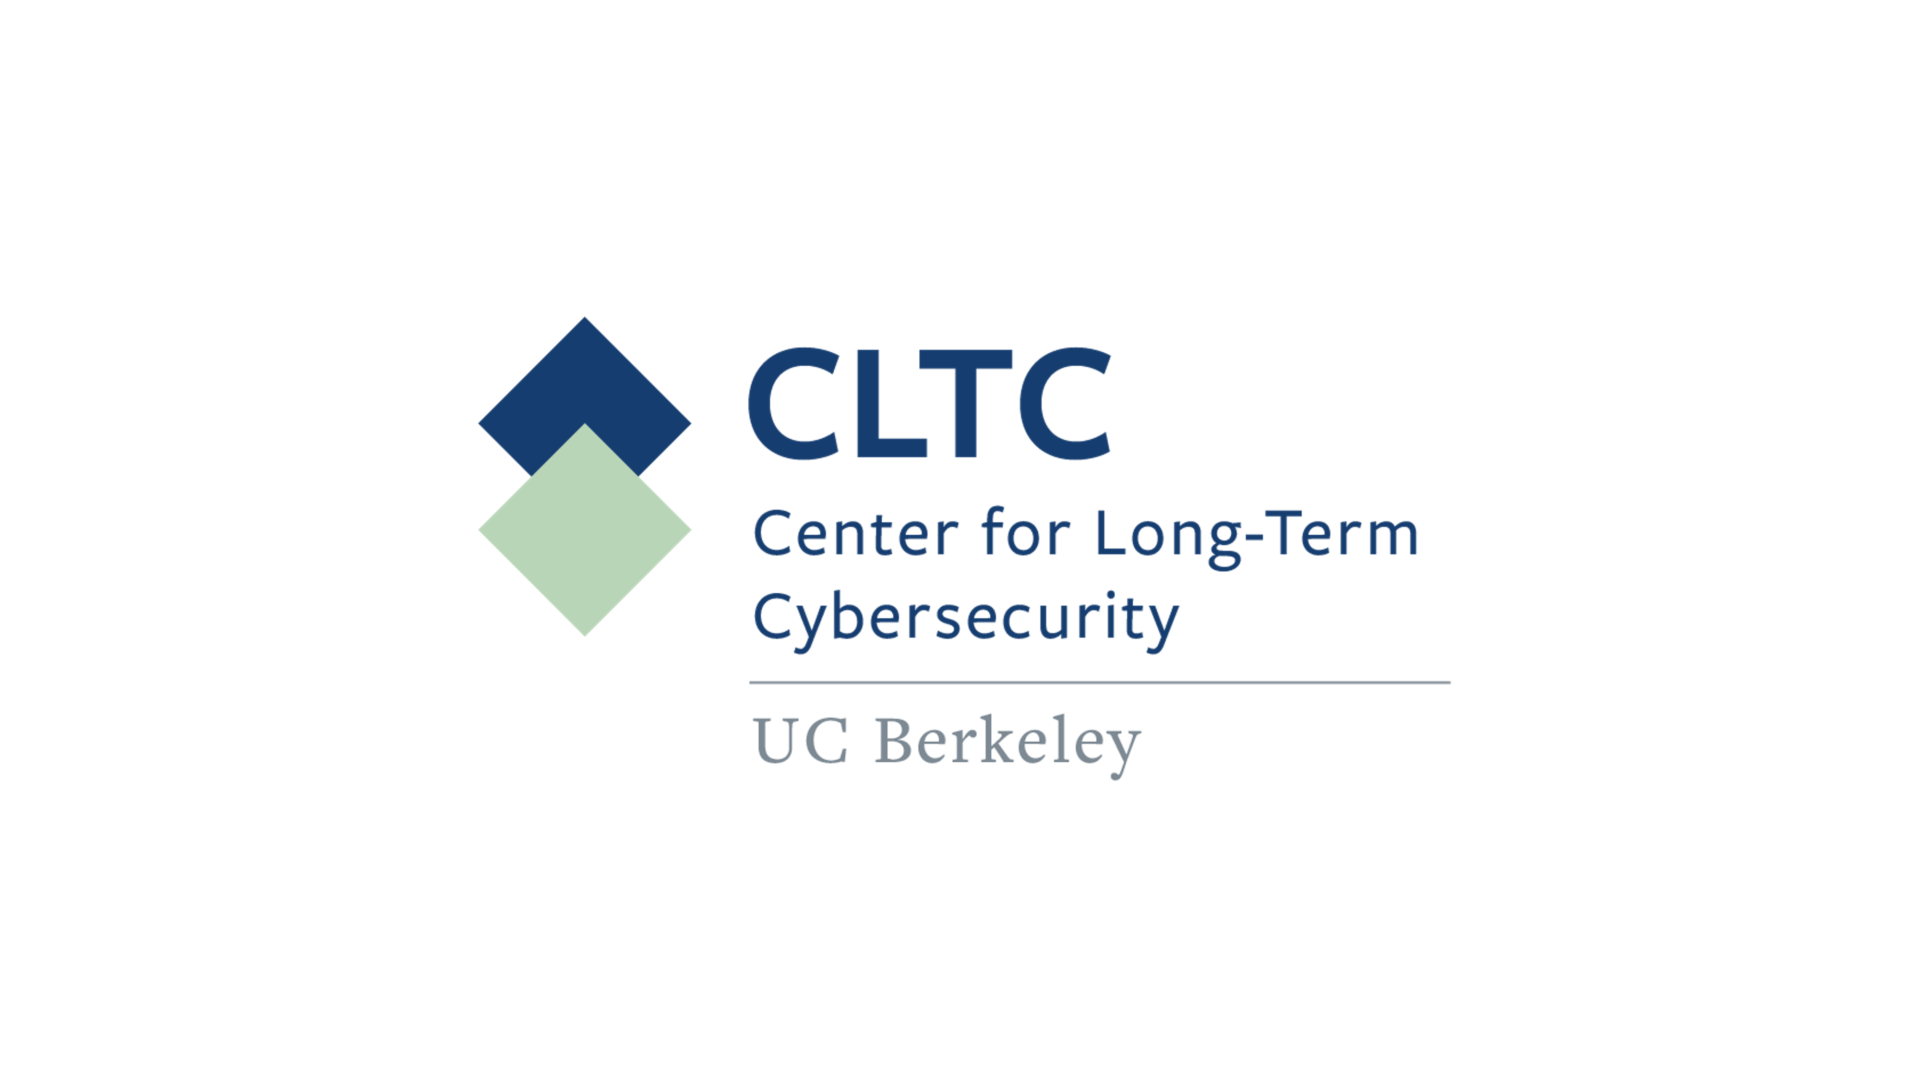 Center for Long-Term Cybersecurity by Berkeley